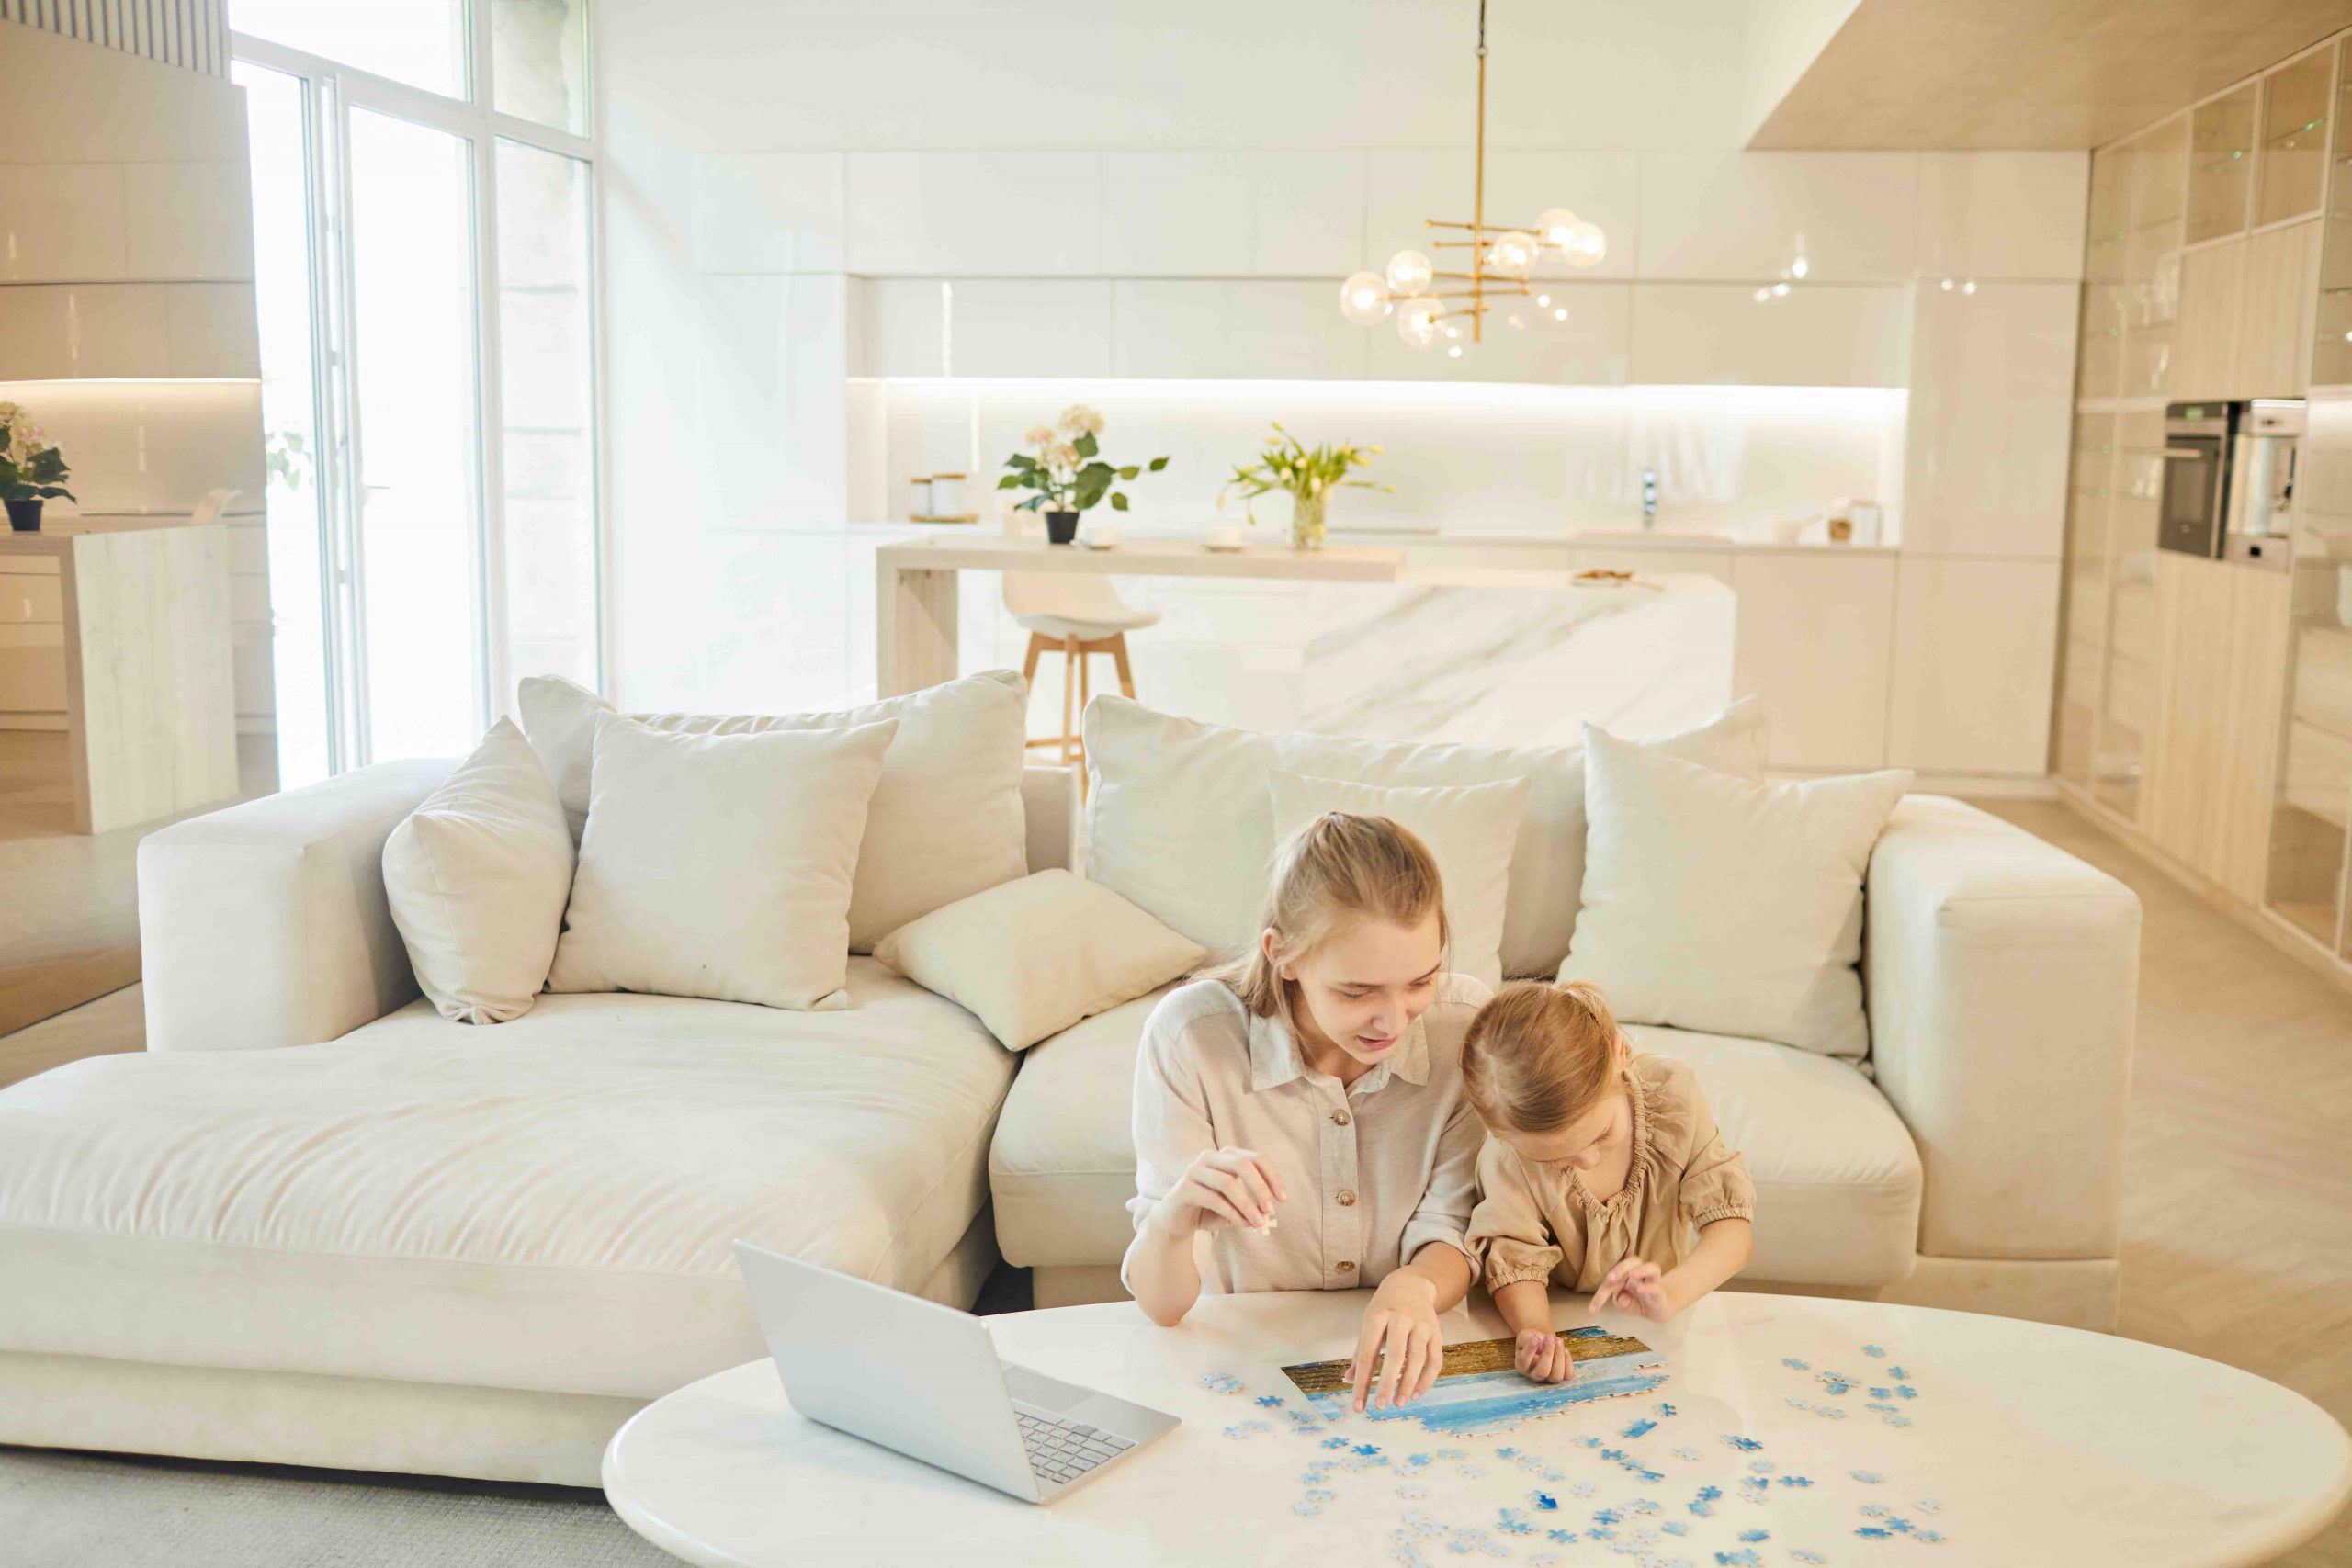 Warm-toned wide angle portrait of two sisters solving puzzle together while enjoying time at home indoors in minimal white interior, copy space